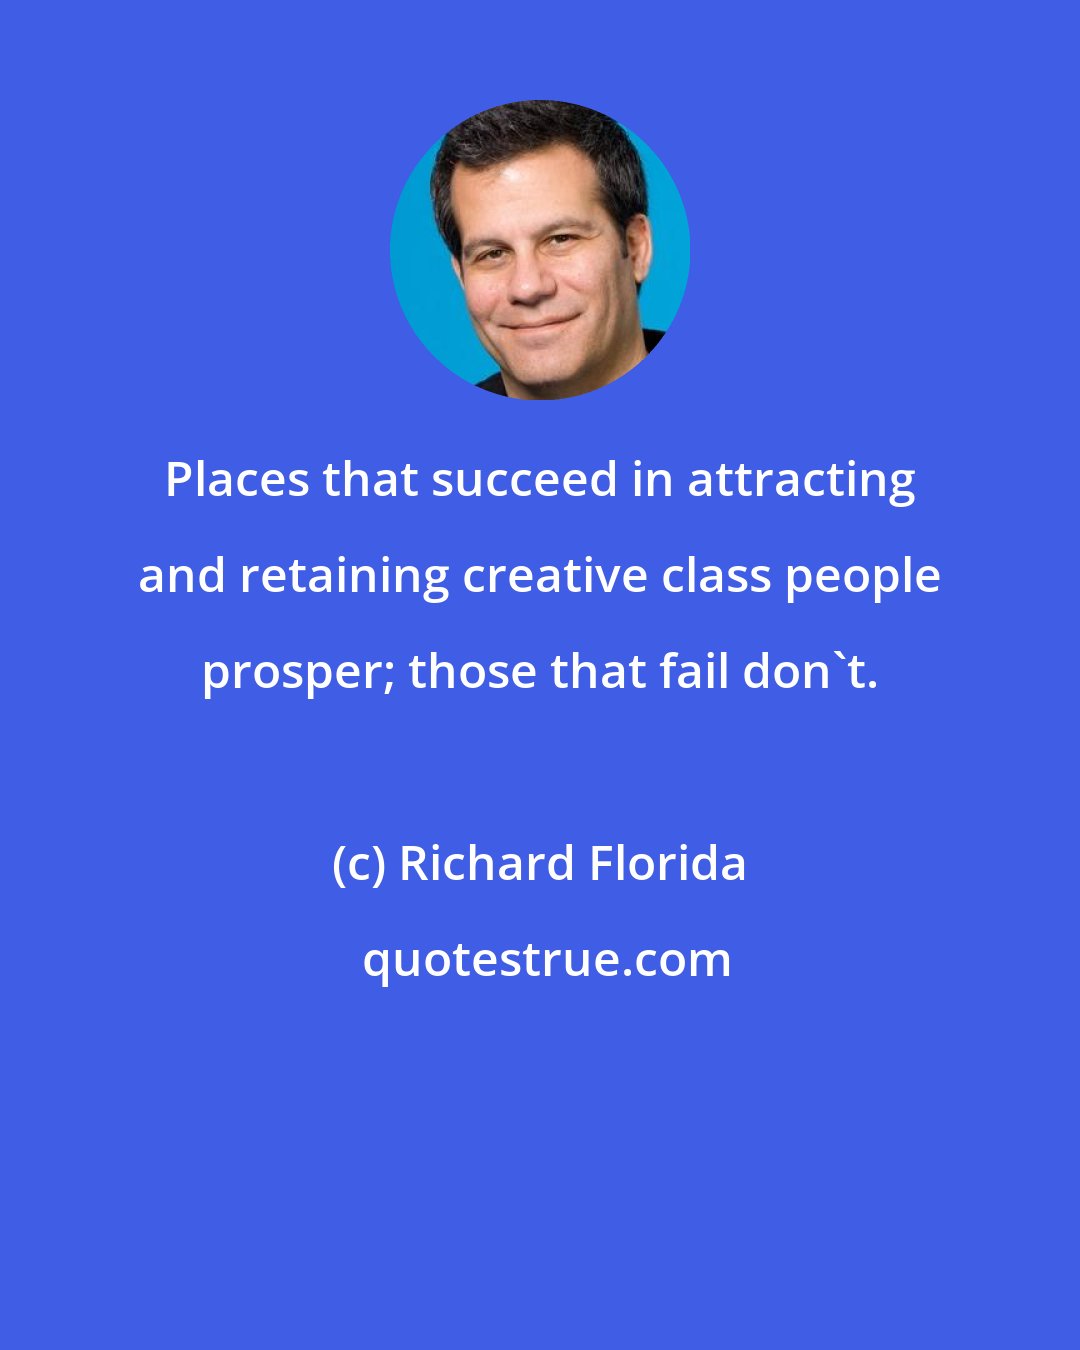 Richard Florida: Places that succeed in attracting and retaining creative class people prosper; those that fail don't.